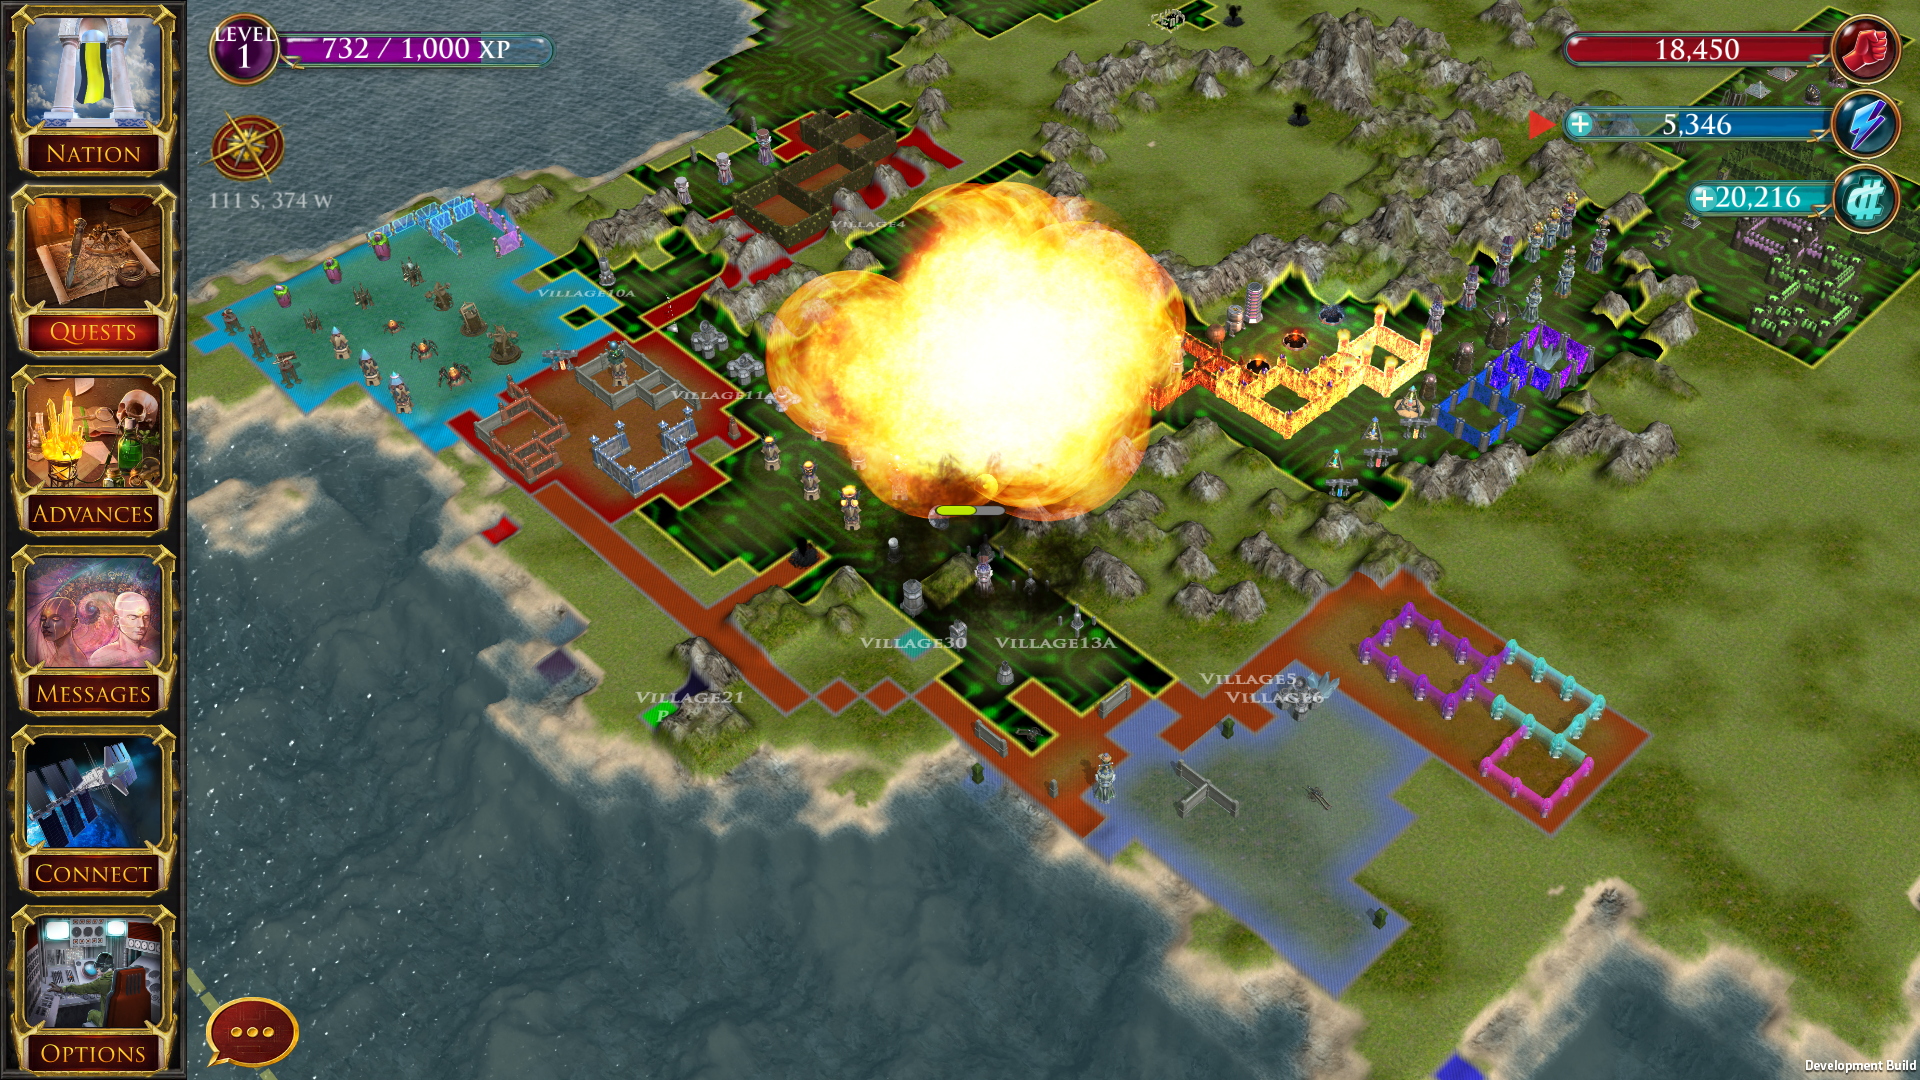 Early development screenshot from the new War of Conquest